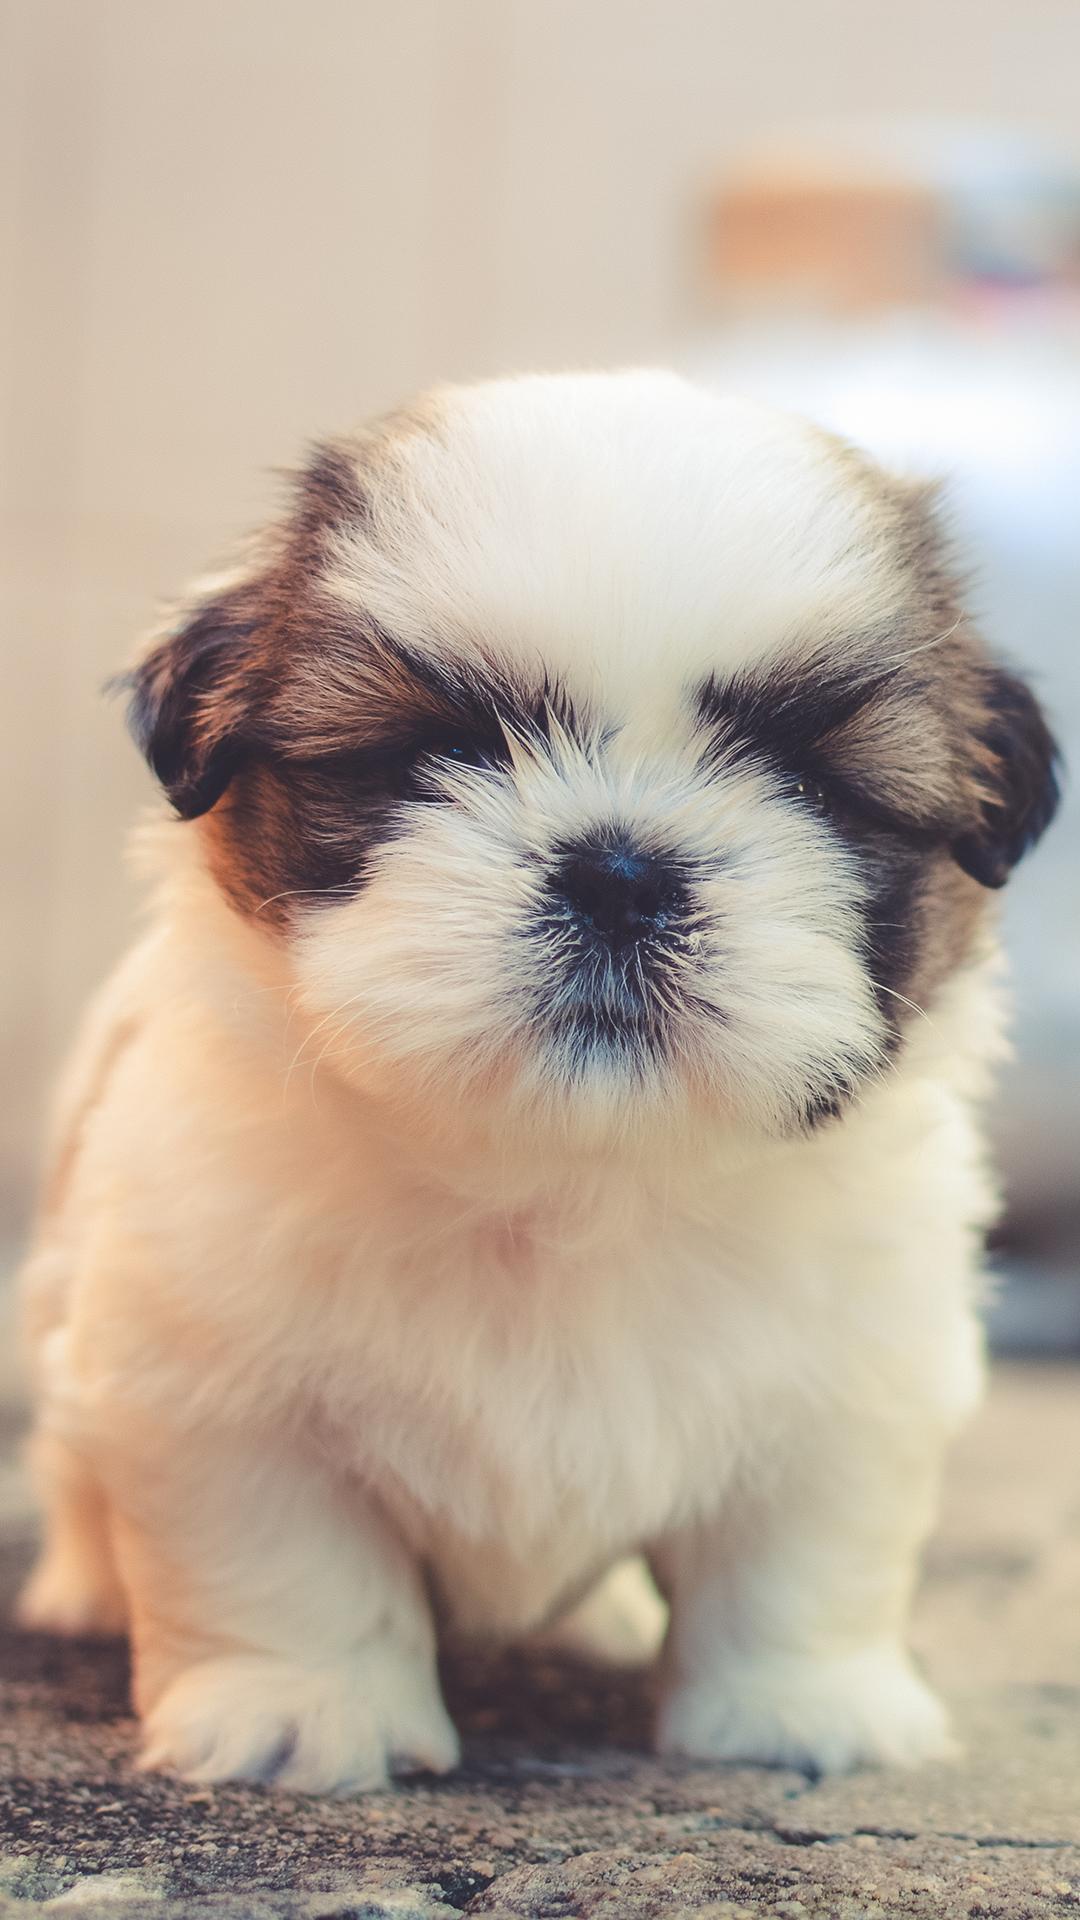 Cute Puppy Wallpaper for Android